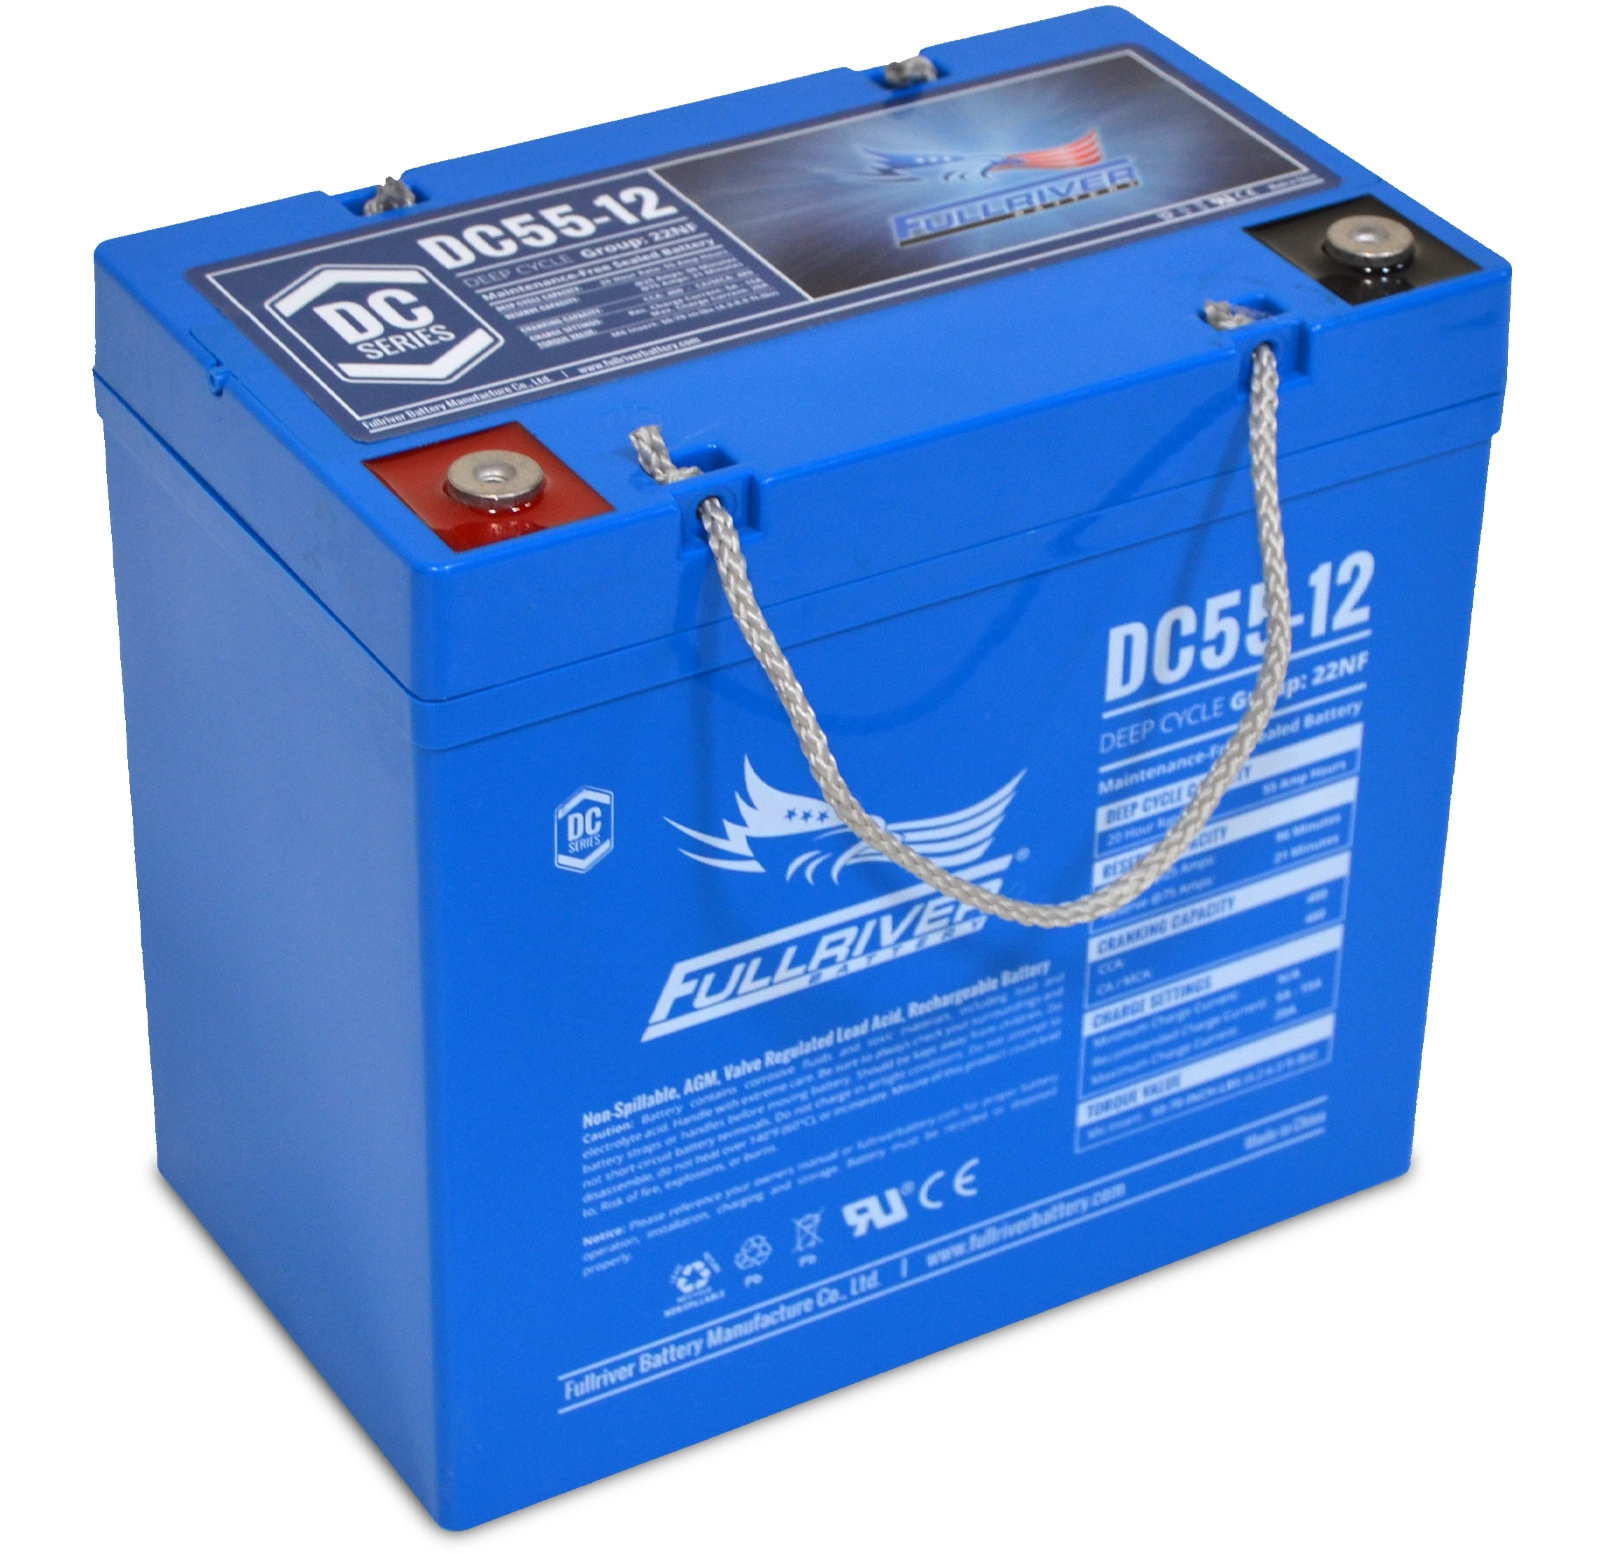 DC Series DC55-12 AGM battery from Fullriver Battery